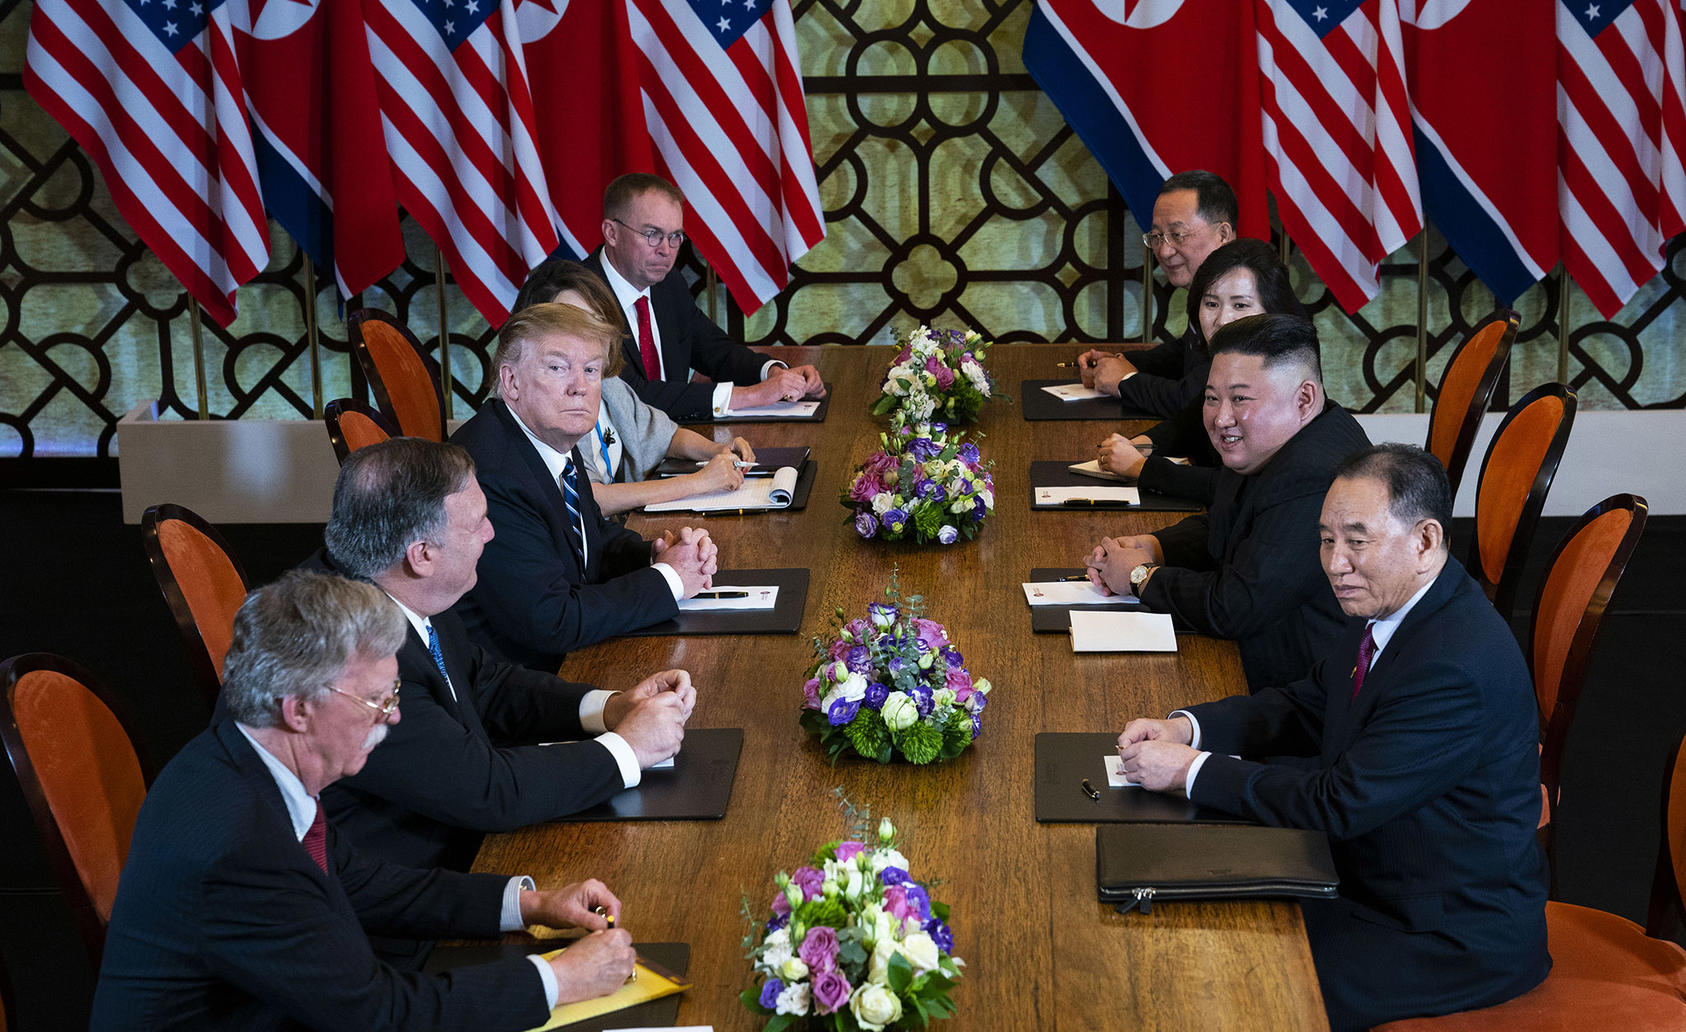 U.S. President Donald Trump sits across from Kim Jong Un, the leader of North Korea, during a February 2019 meeting in Vietnam. (Photo by Doug Mills/New York Times)